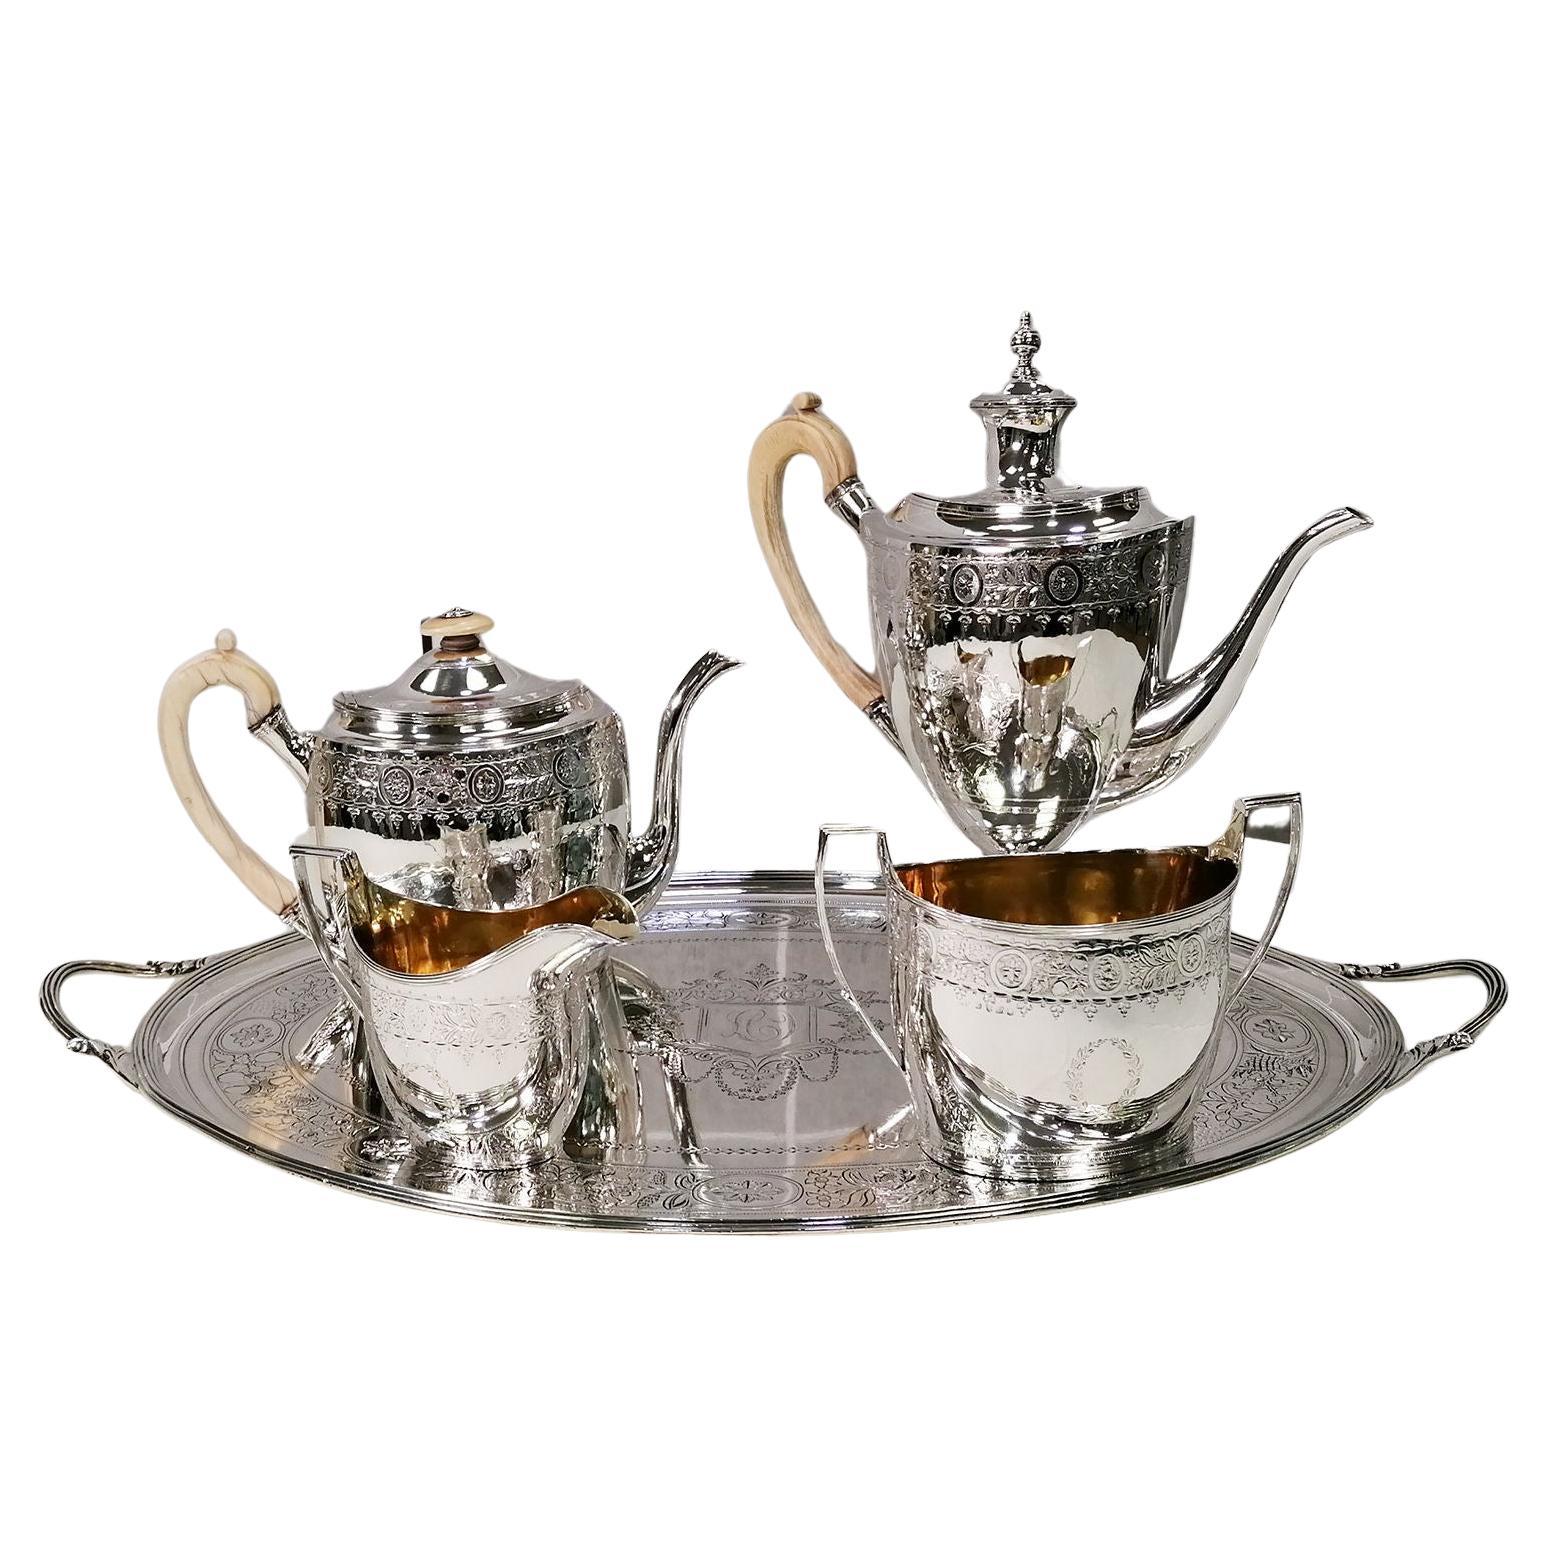 Antique George III Sterling Silver Tea-Coffeeset ivory Handles & Tray 1798-1800